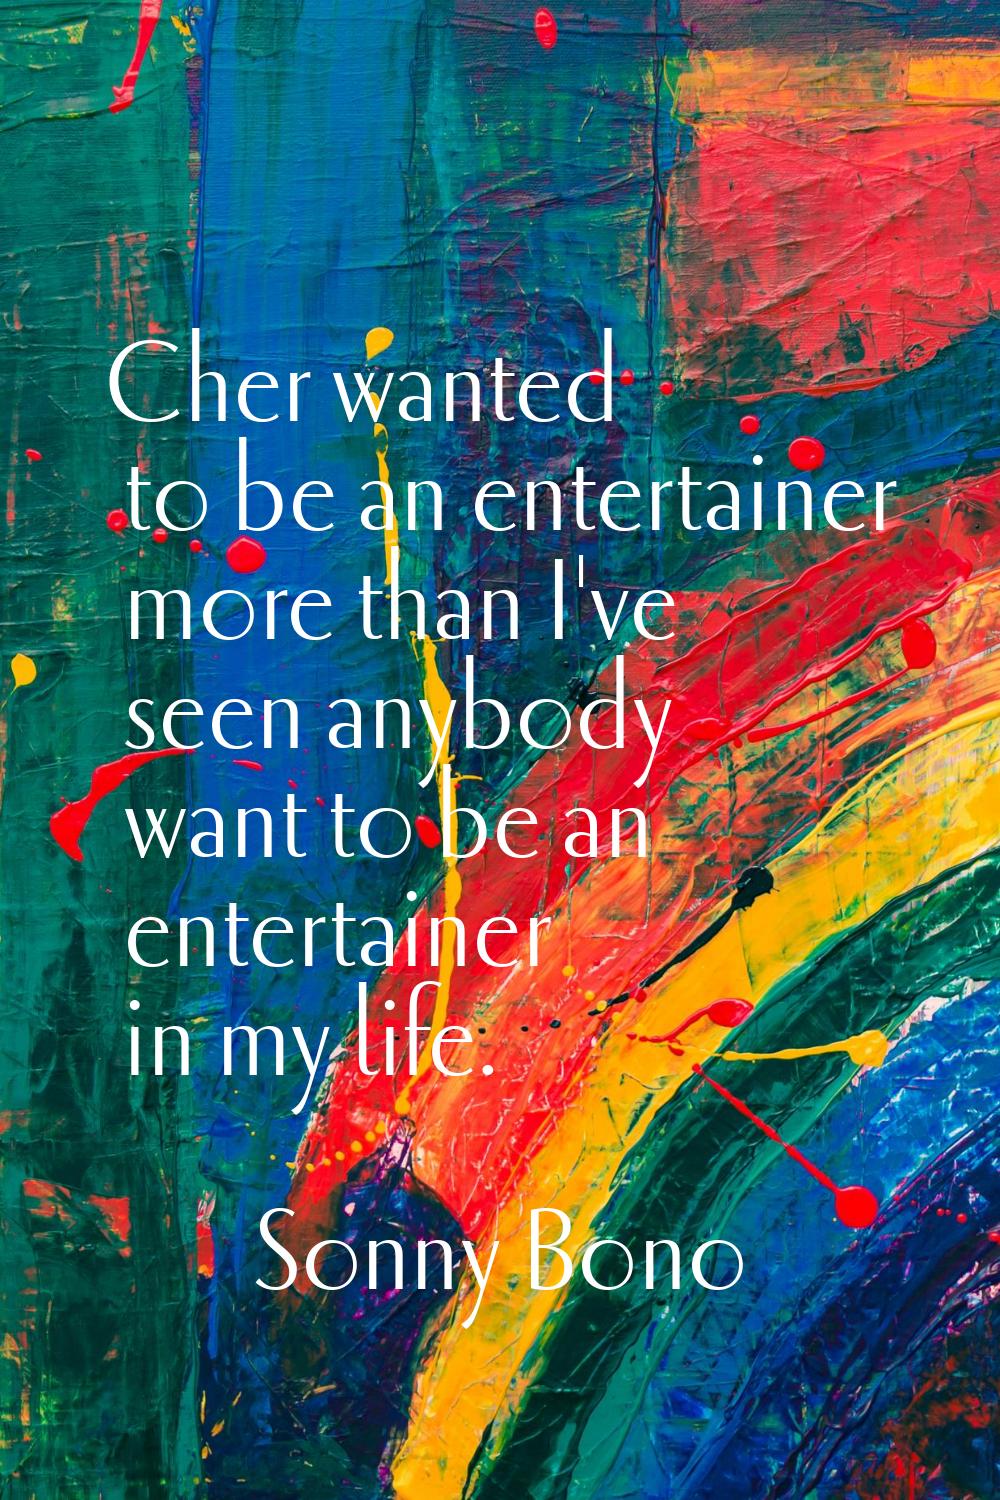 Cher wanted to be an entertainer more than I've seen anybody want to be an entertainer in my life.